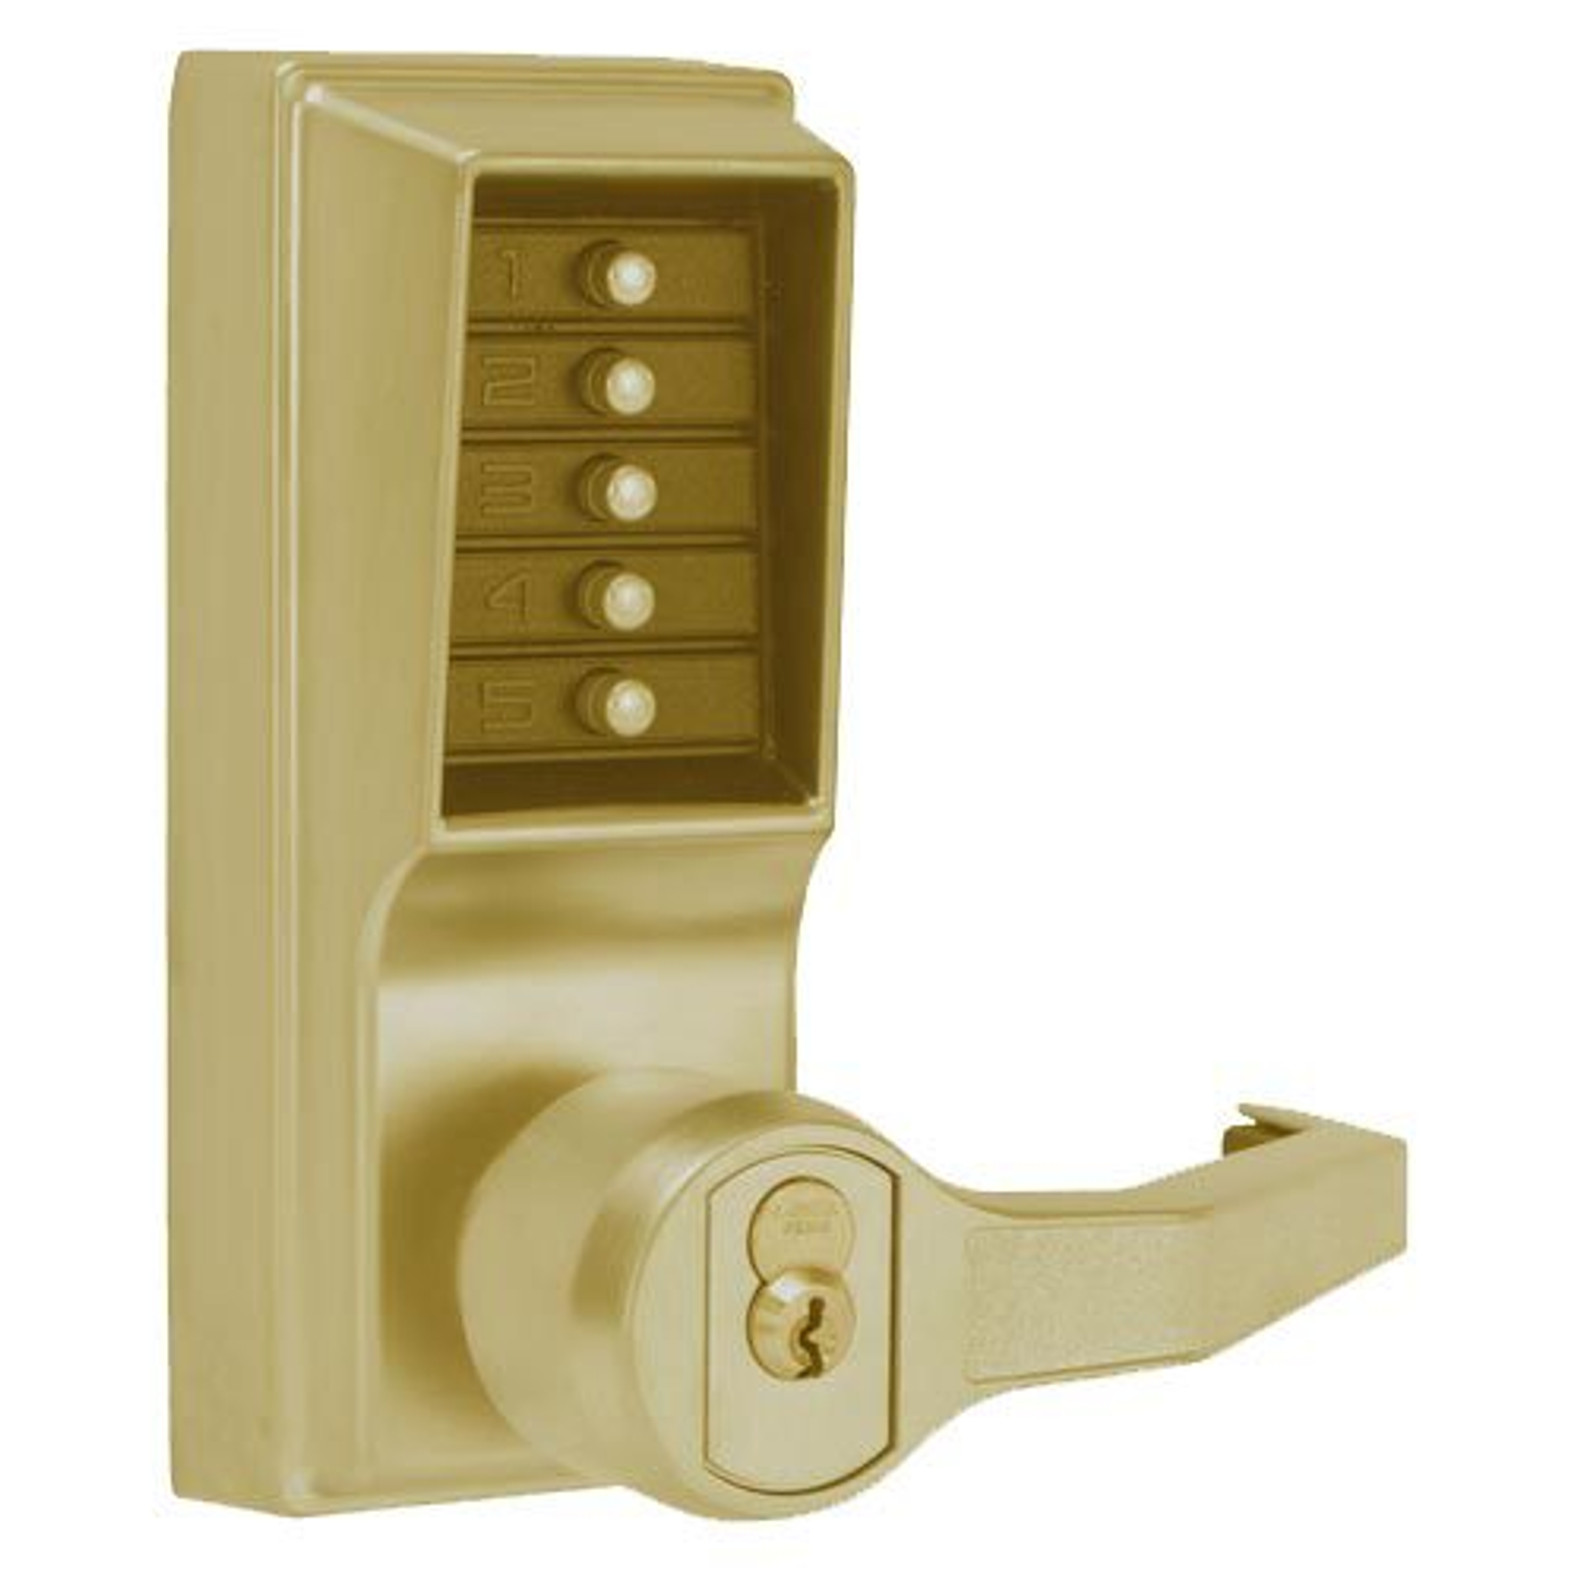 Dormakaba LL1041B-05-41 Pushbutton Lever Lock Prepped For Best Core  Override in Antique Brass - KAL DOOR HARDWARE